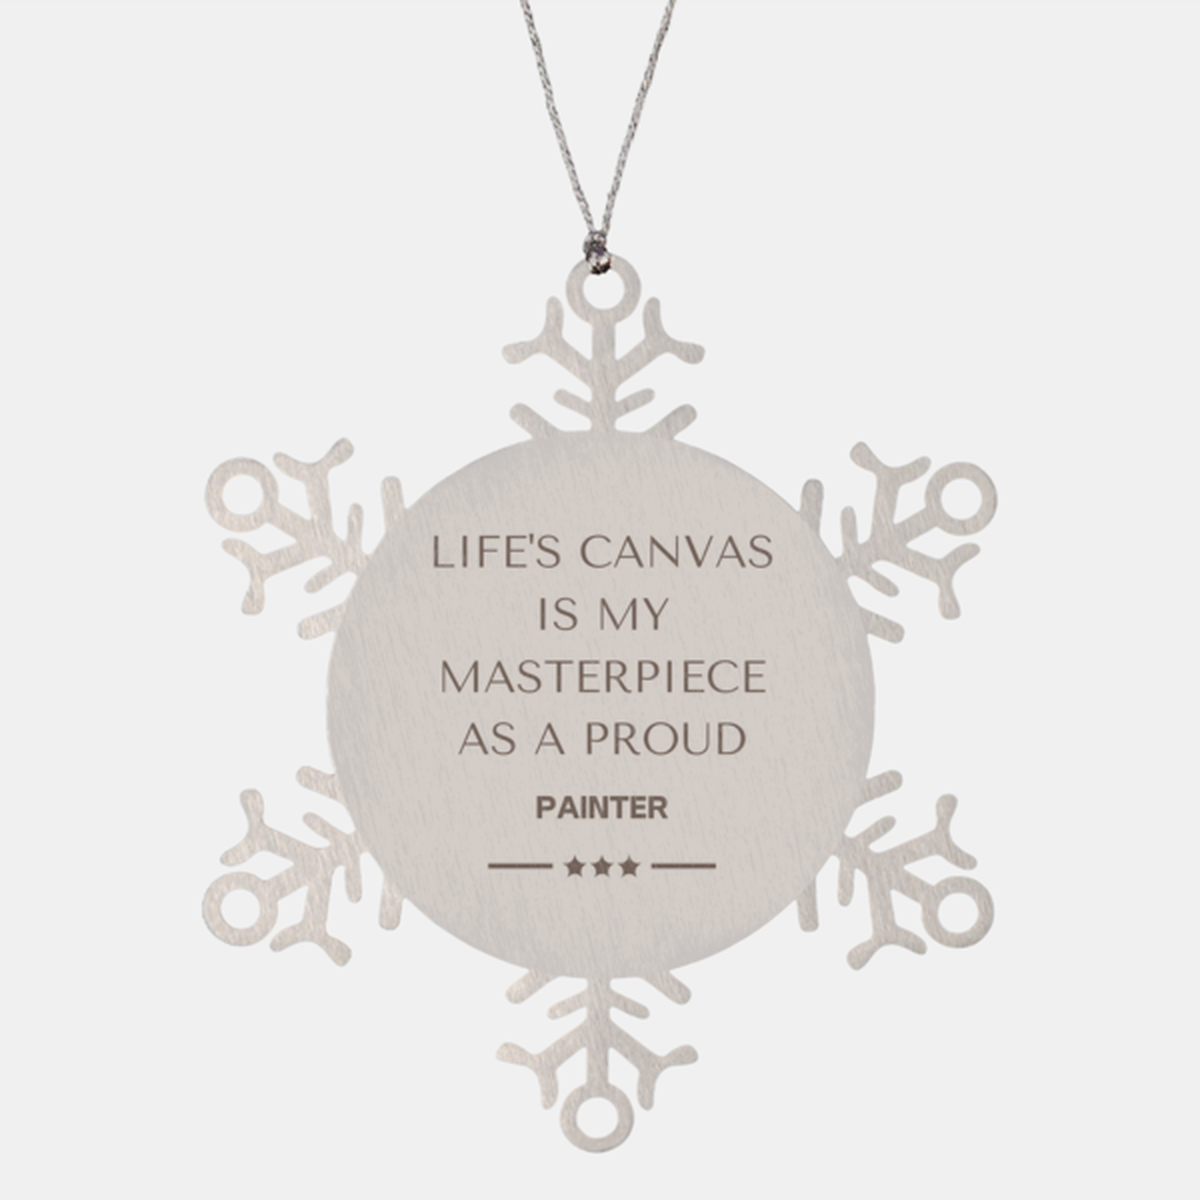 Proud Painter Gifts, Life's canvas is my masterpiece, Epic Birthday Christmas Unique Snowflake Ornament For Painter, Coworkers, Men, Women, Friends